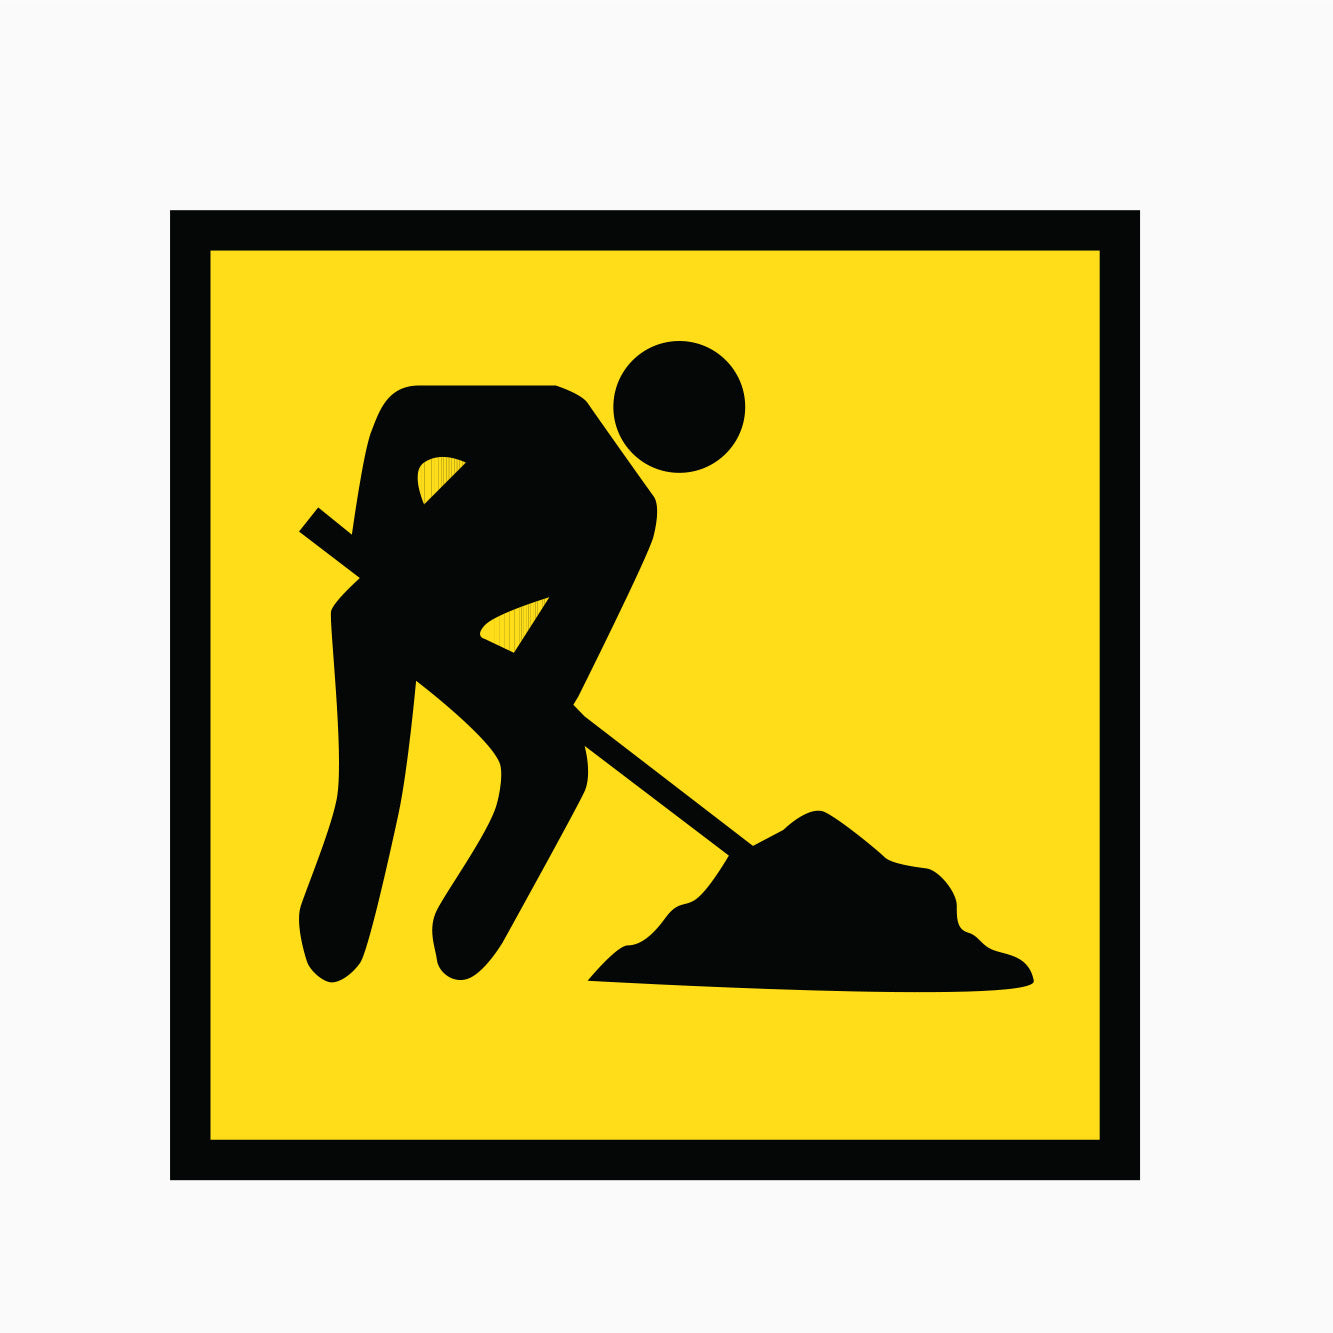 WORKERS AHEAD SIGN - ROAD & TRAFFIC SAFETY SIGN - QUALITY SIGNS AT GET SIGNS IN AUSTRALIA